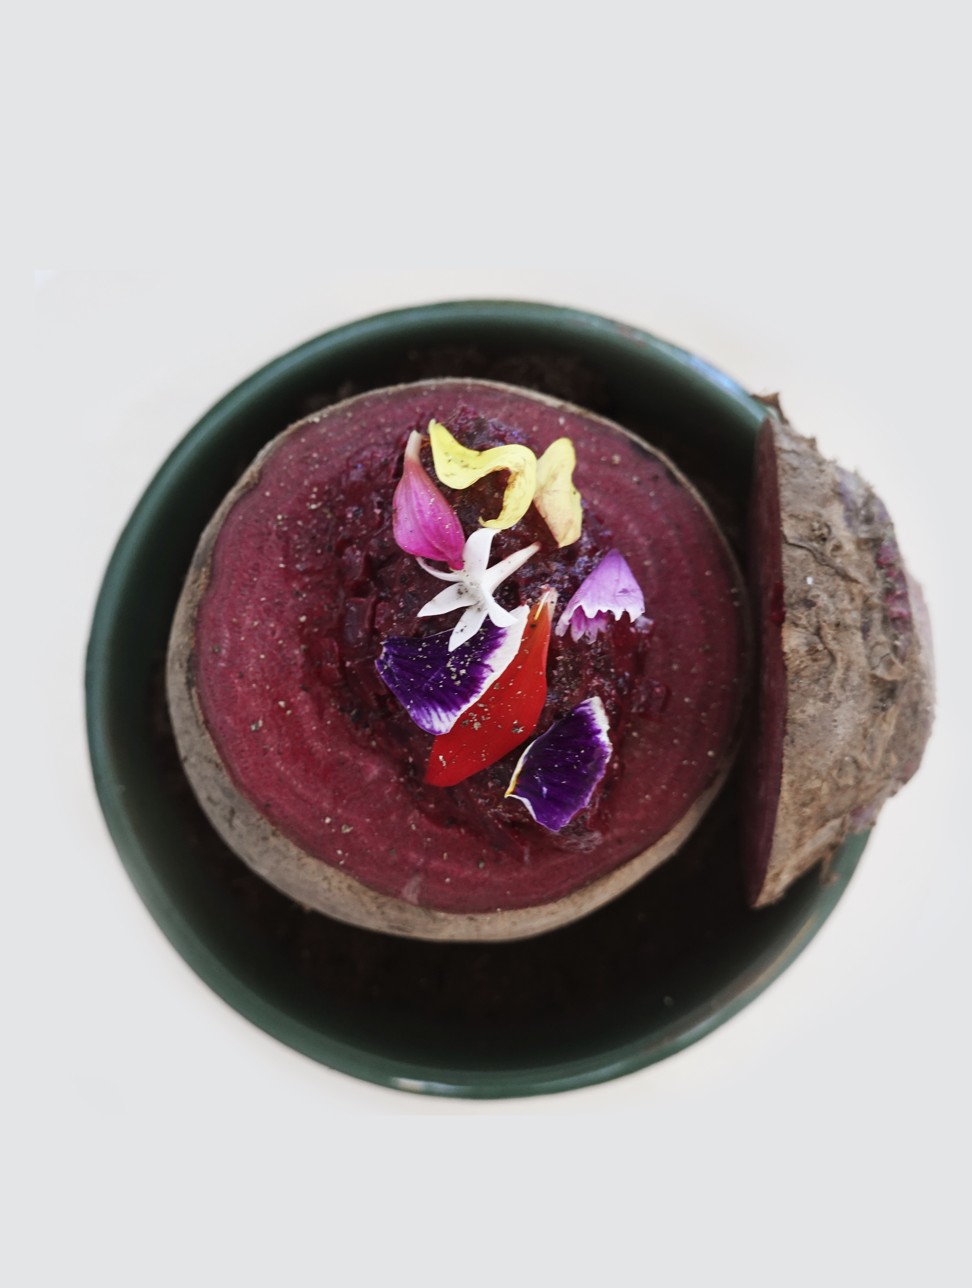 A tartar of beets, apples and avocado. Photo: Jeff Koehler